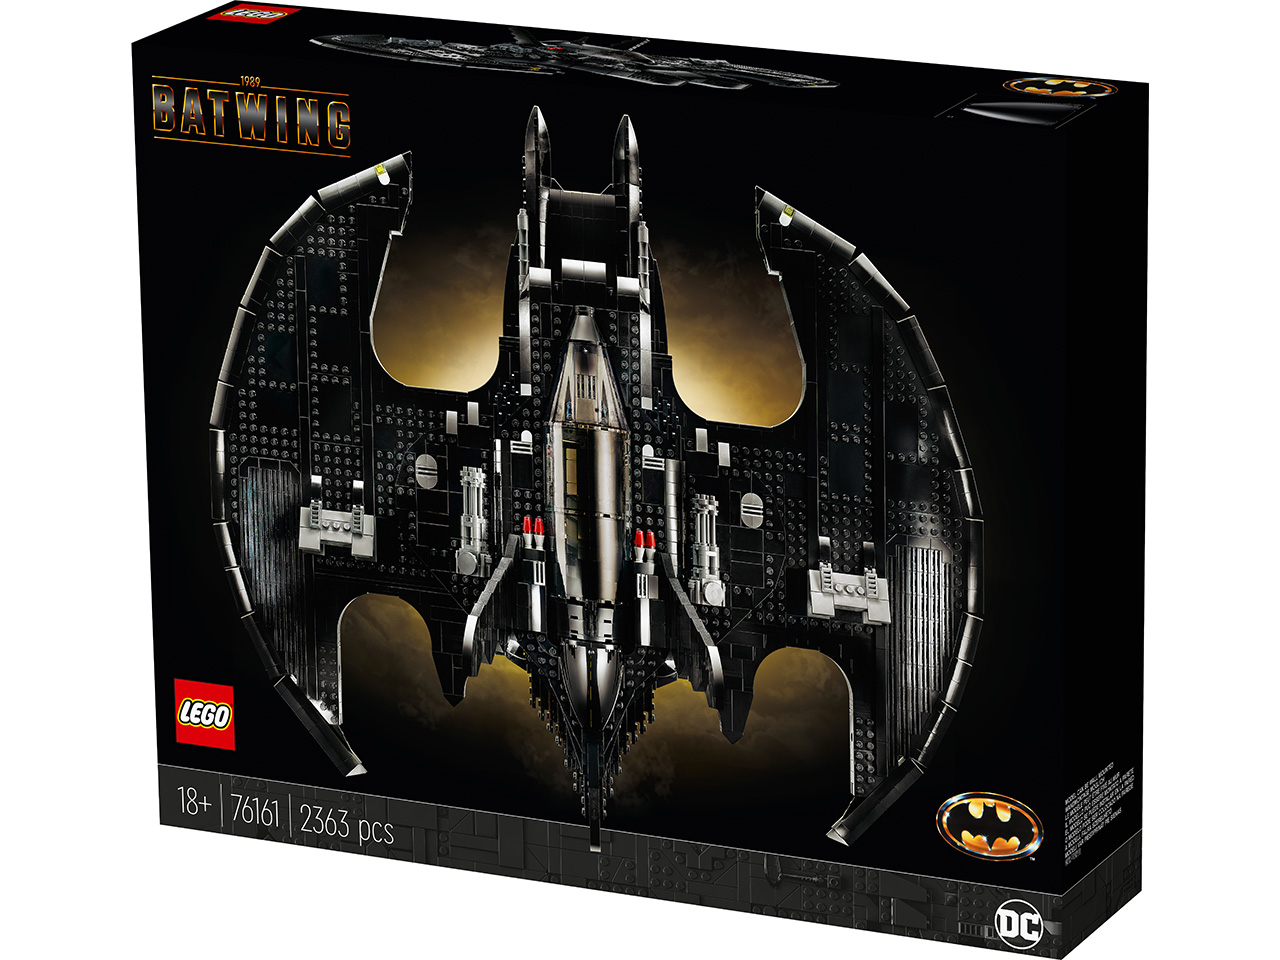 Batman 1989 Batwing Set Coming in October from Lego – The